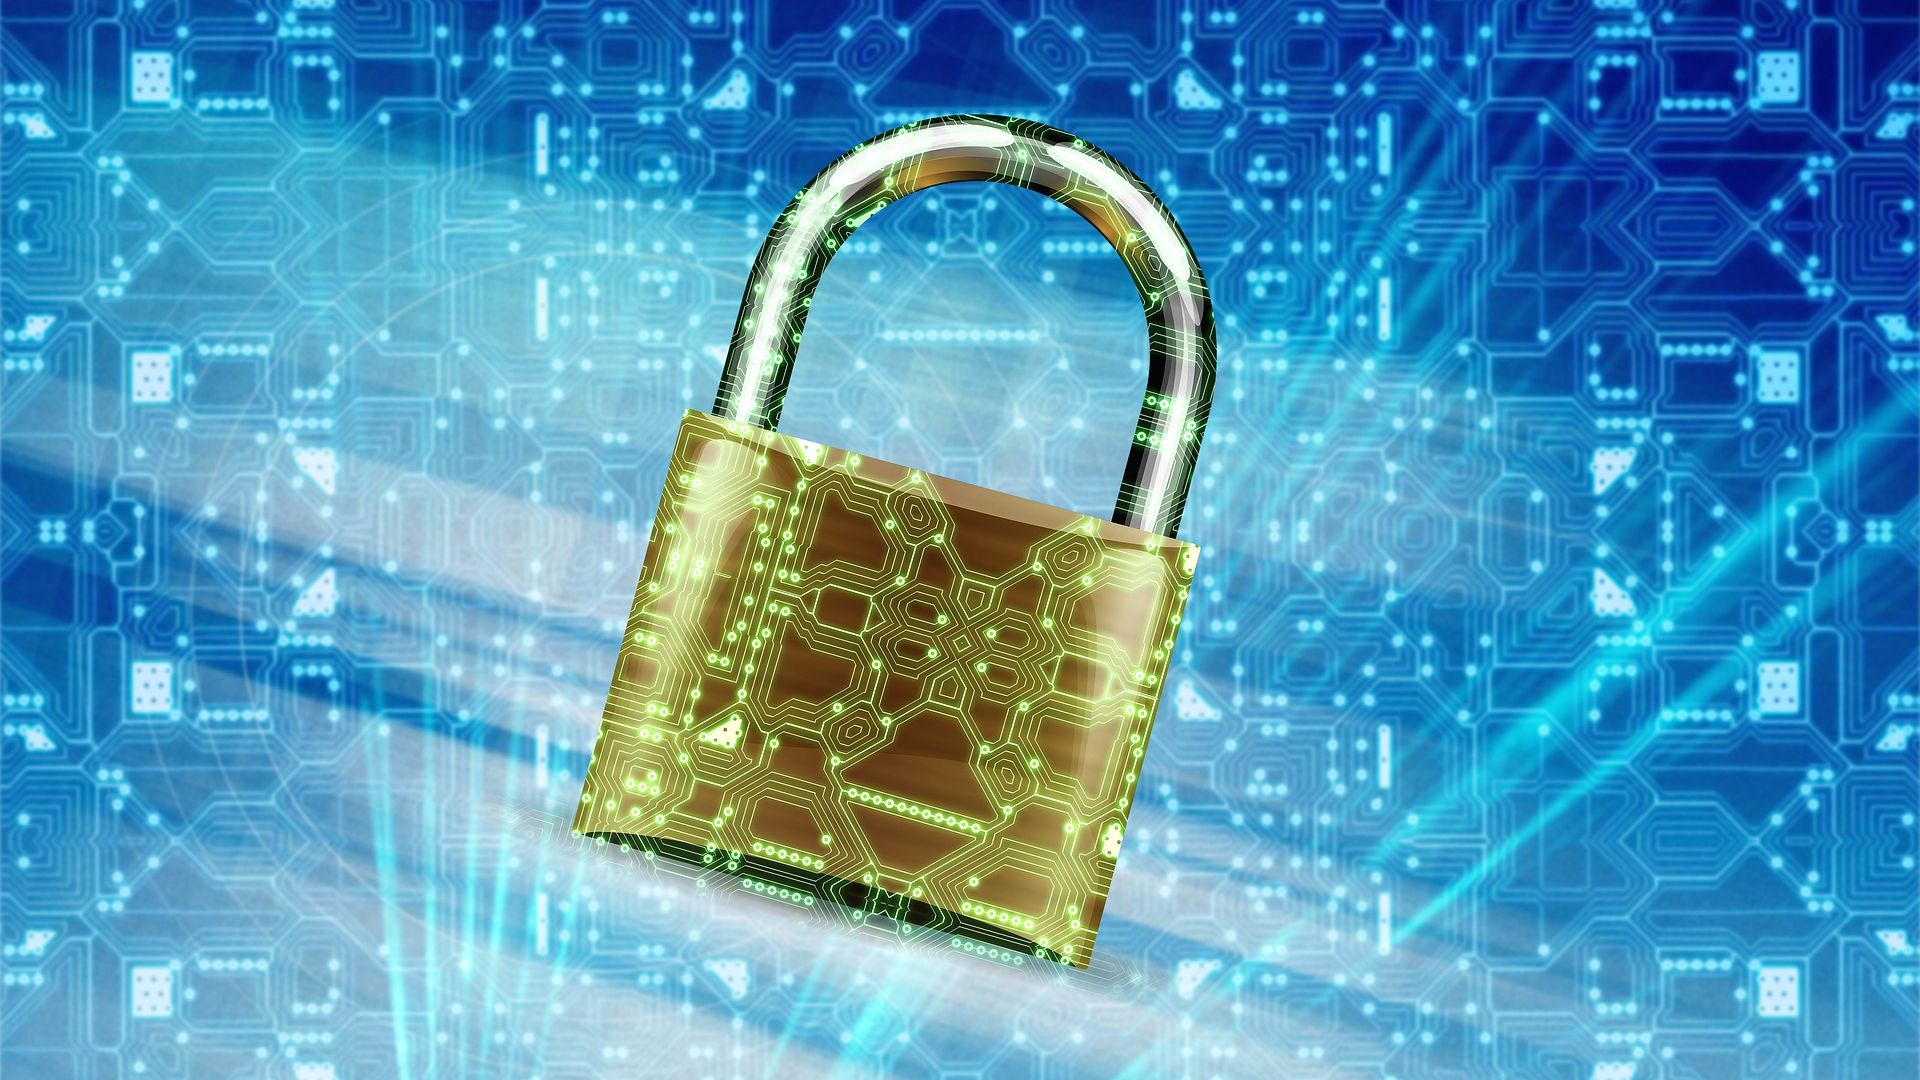 Padlock graphic with circle pattern on blue background